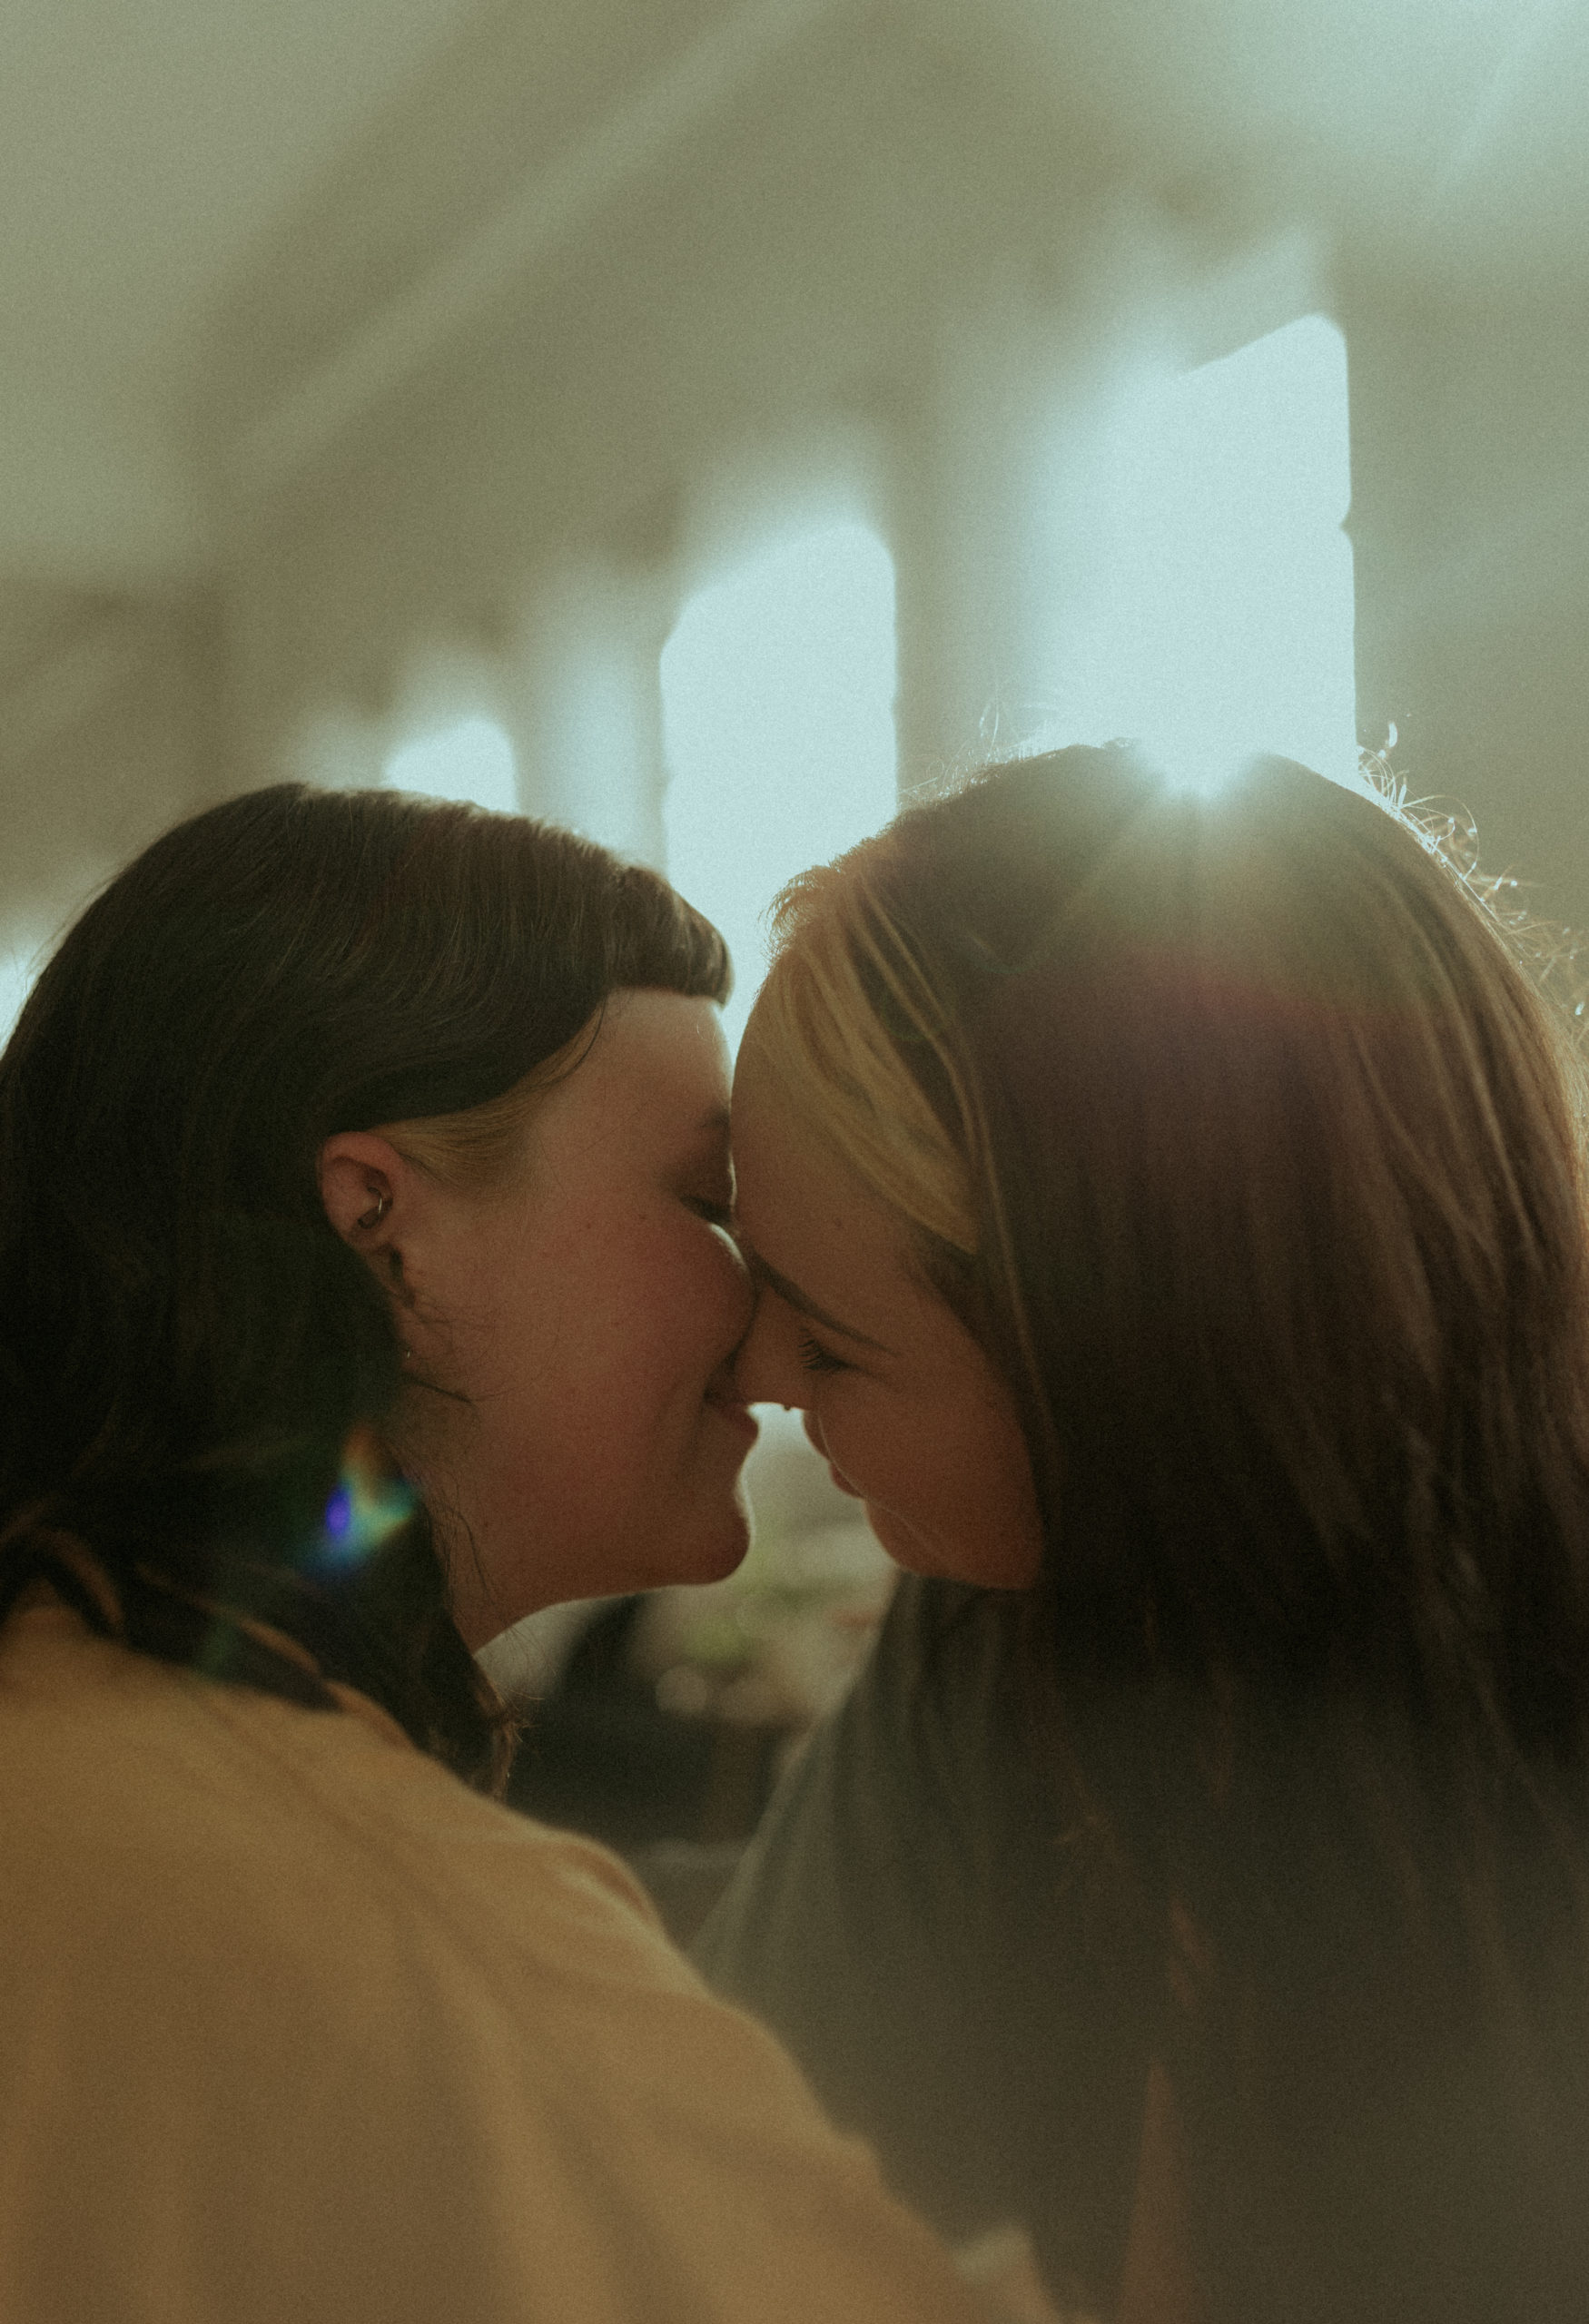 Lesbian Couple Almost Kissing by Window